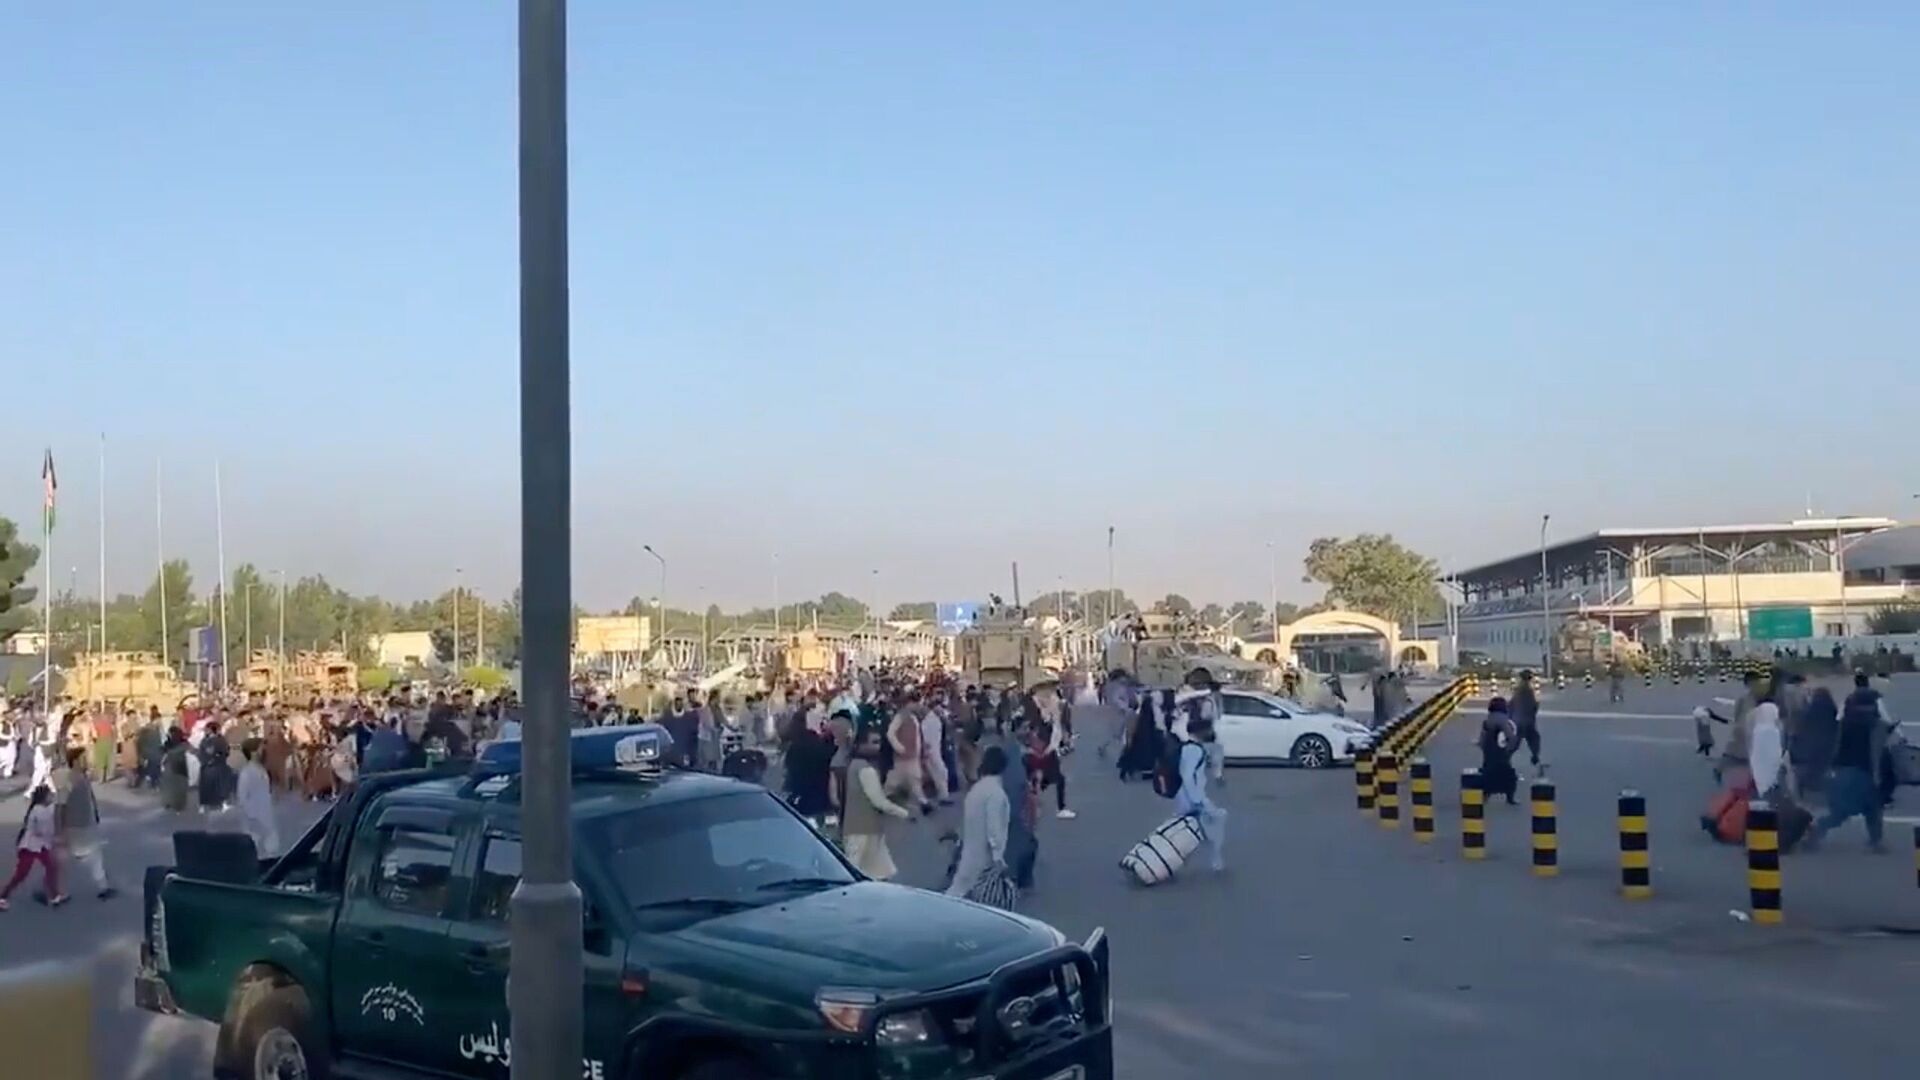 A horde of people run towards the Kabul Airport Terminal, after Taliban insurgents took control of the presidential palace in Kabul, August 16, 2021, in this still image taken from video obtained from social media - Sputnik International, 1920, 07.09.2021